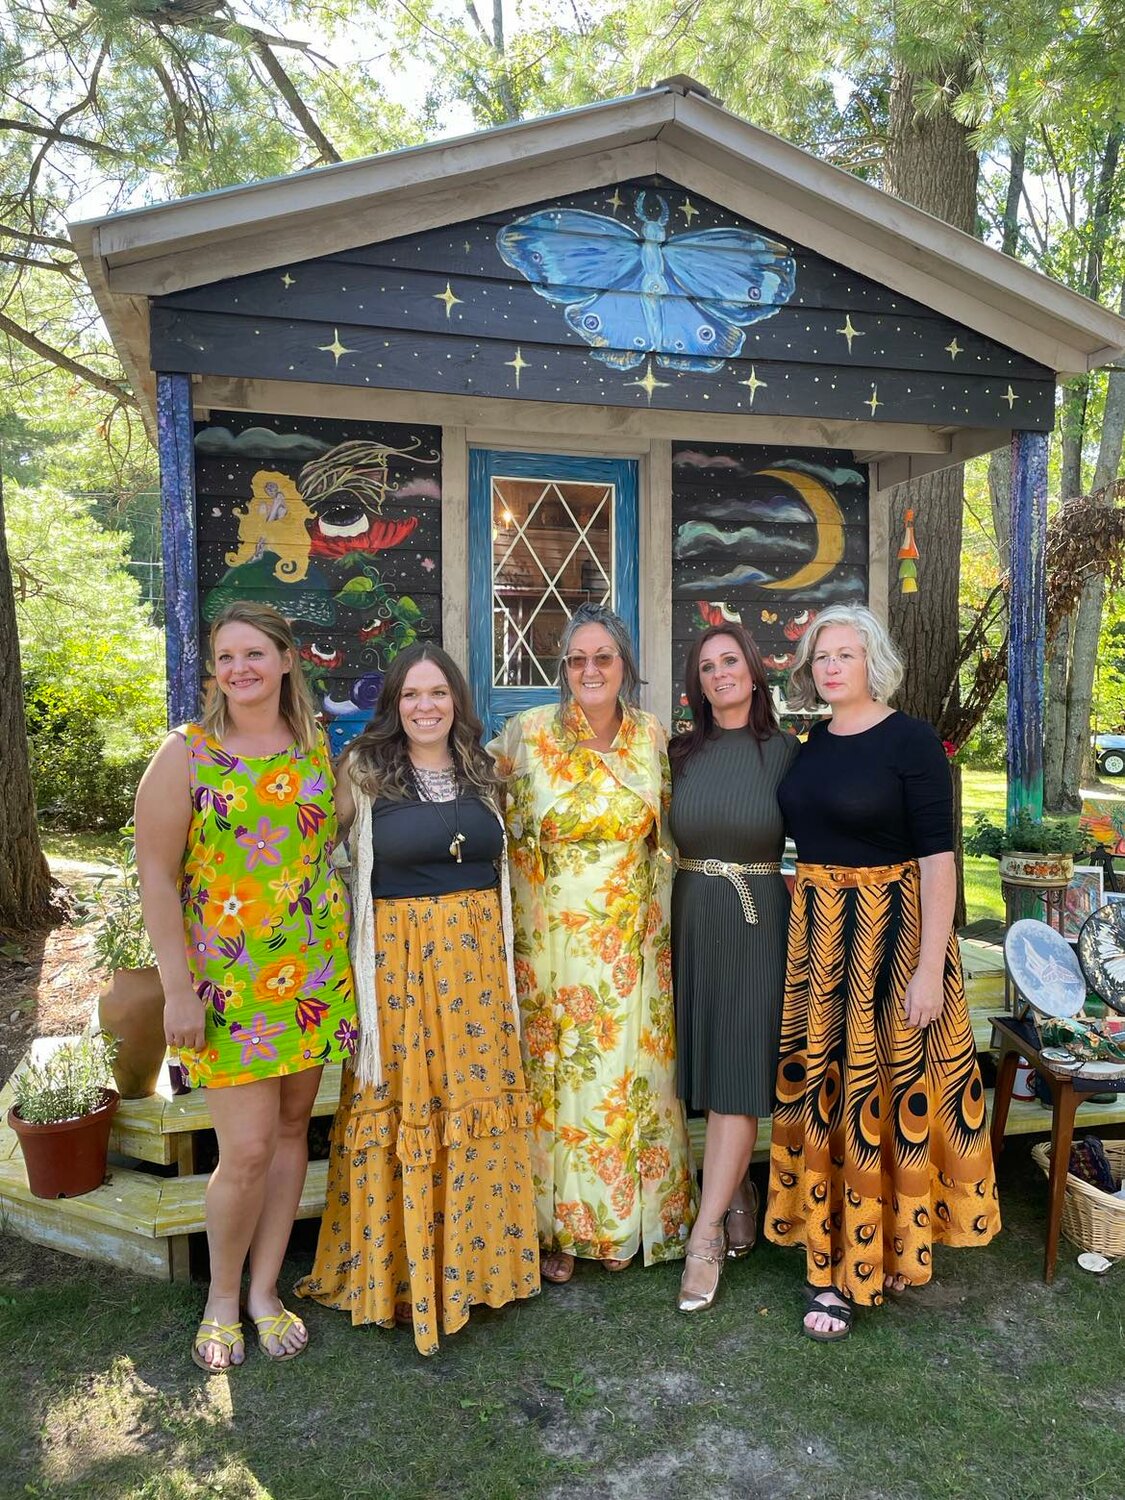 Artists invited by Genvieve Wolfrum to paint murals at Goddess Studio attended an open house in their honor on Saturday, Sept. 9. Left to right: Rebecca Mann, Mary Starr, Genevieve Wolfrum, Jess Diponio, and Kelly Crandall.